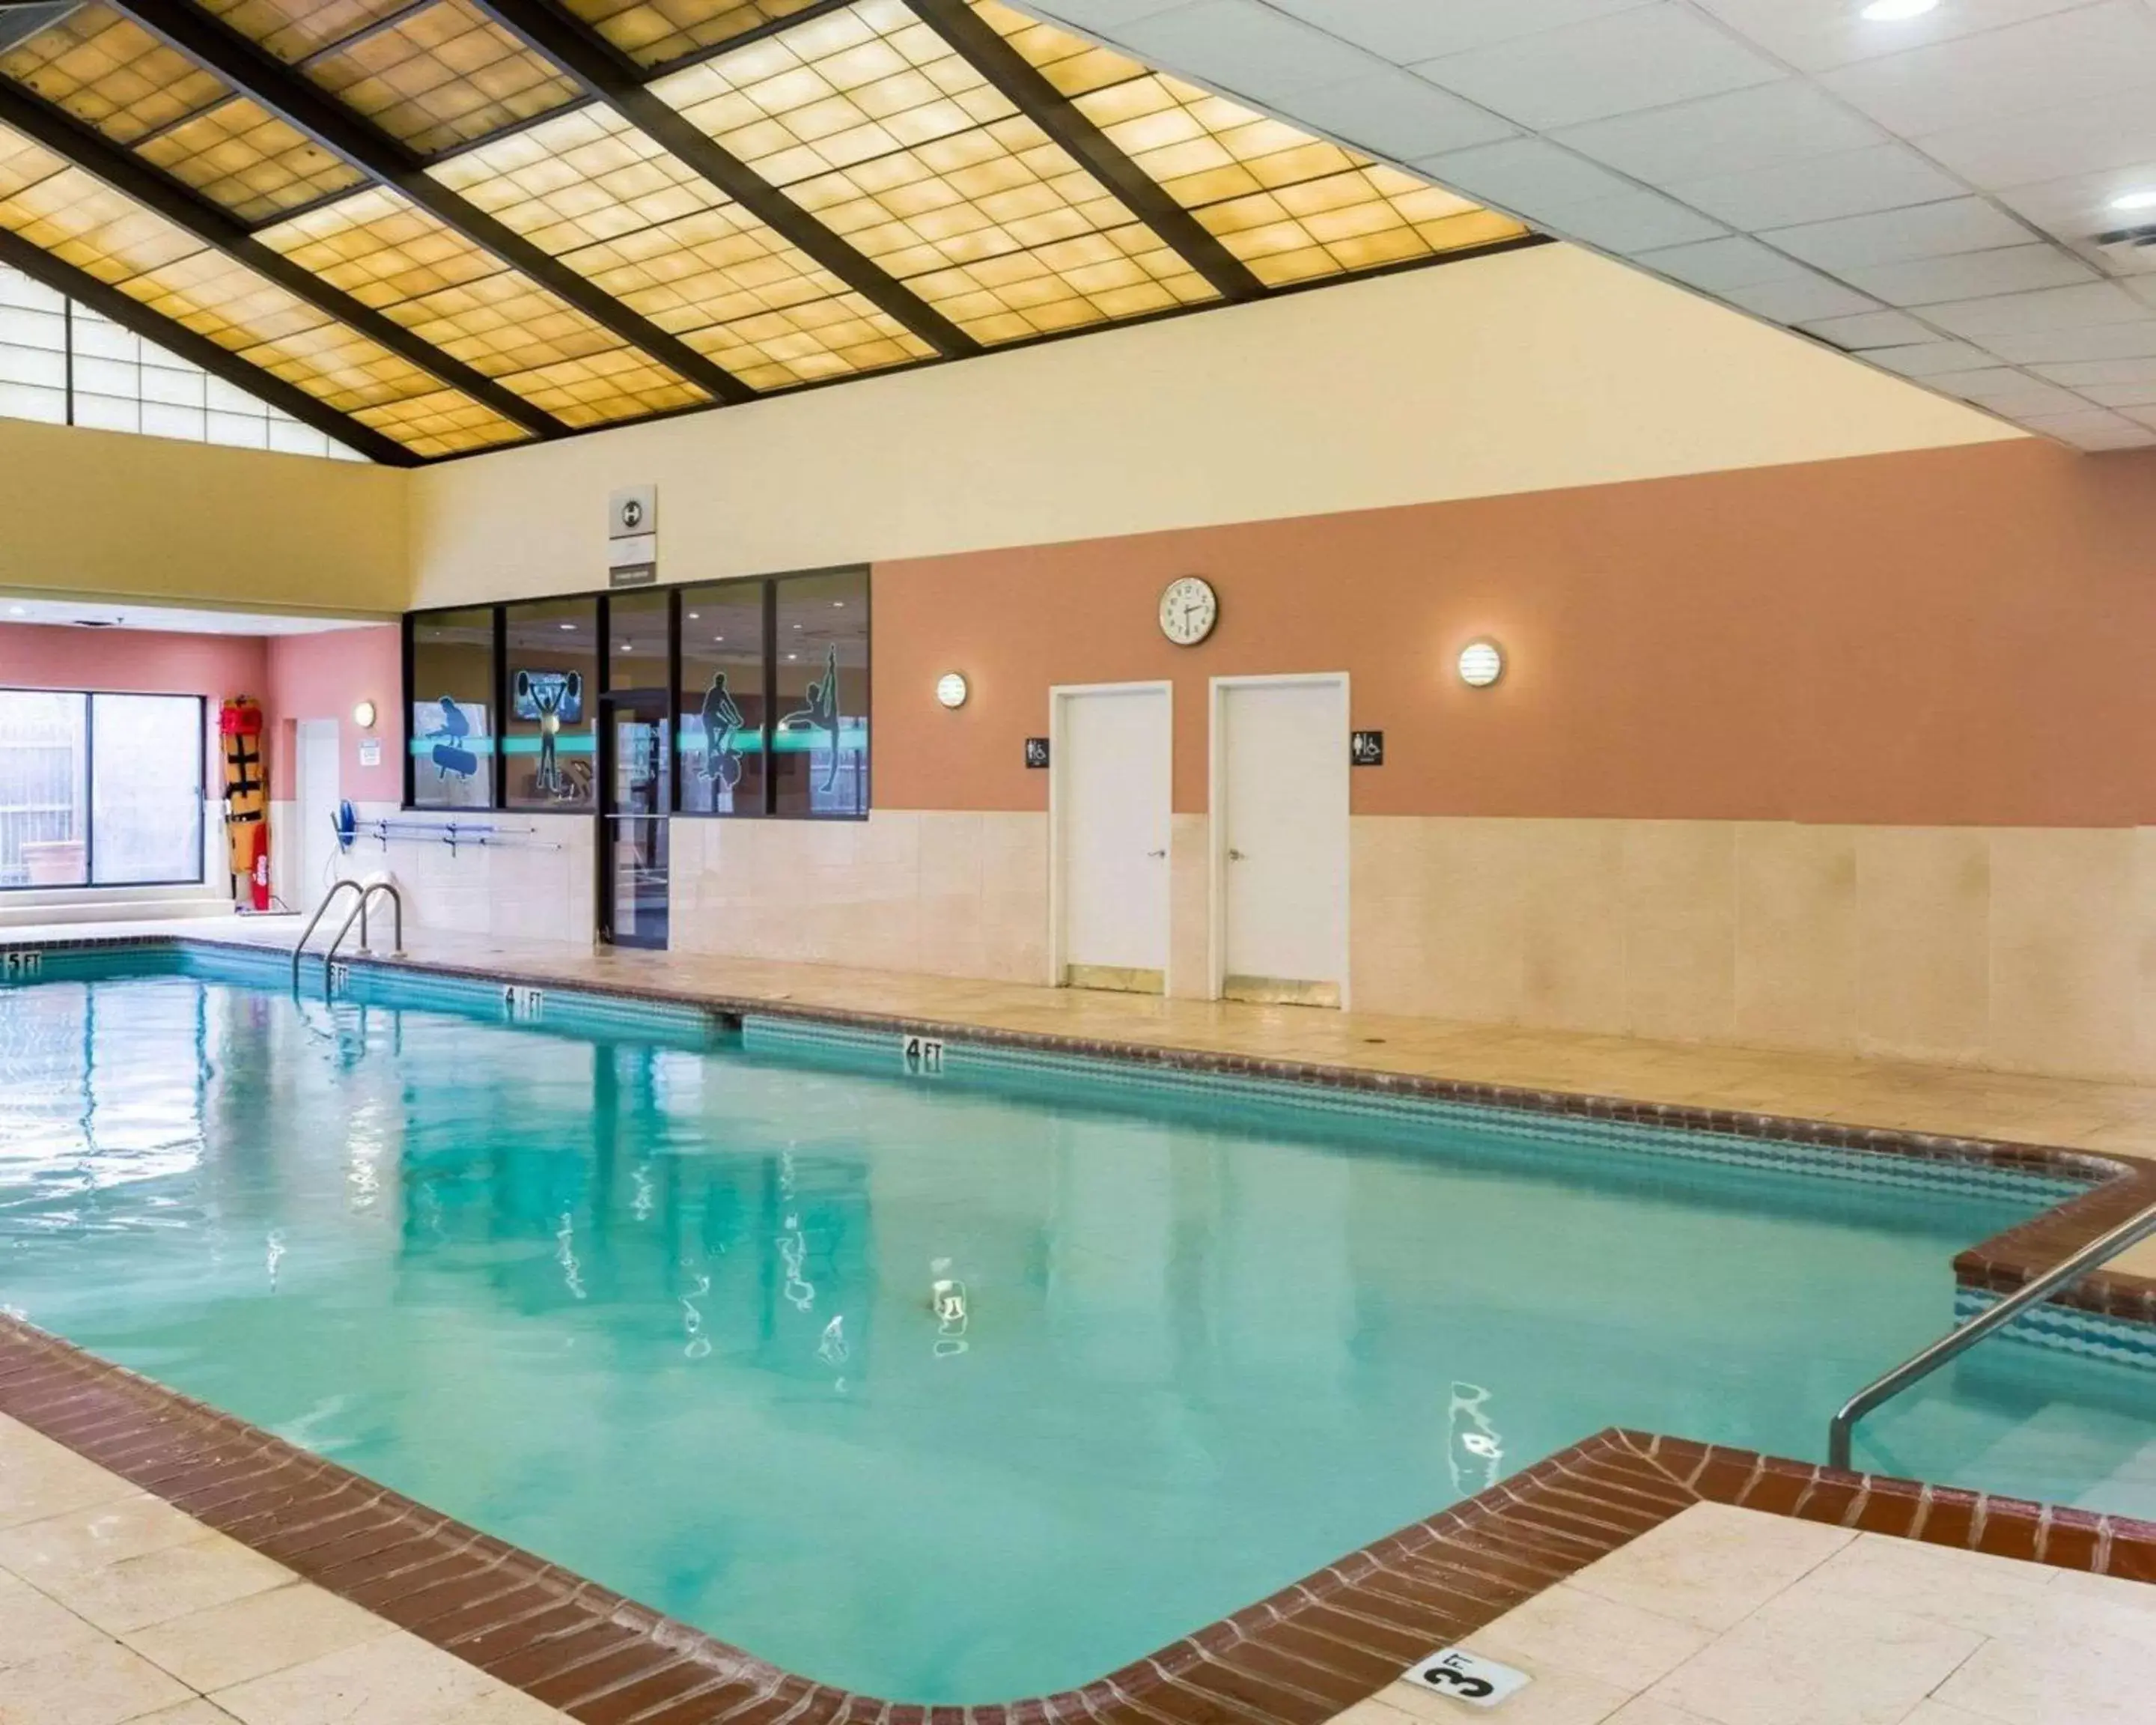 On site, Swimming Pool in Clarion Hotel Somerset - New Brunswick